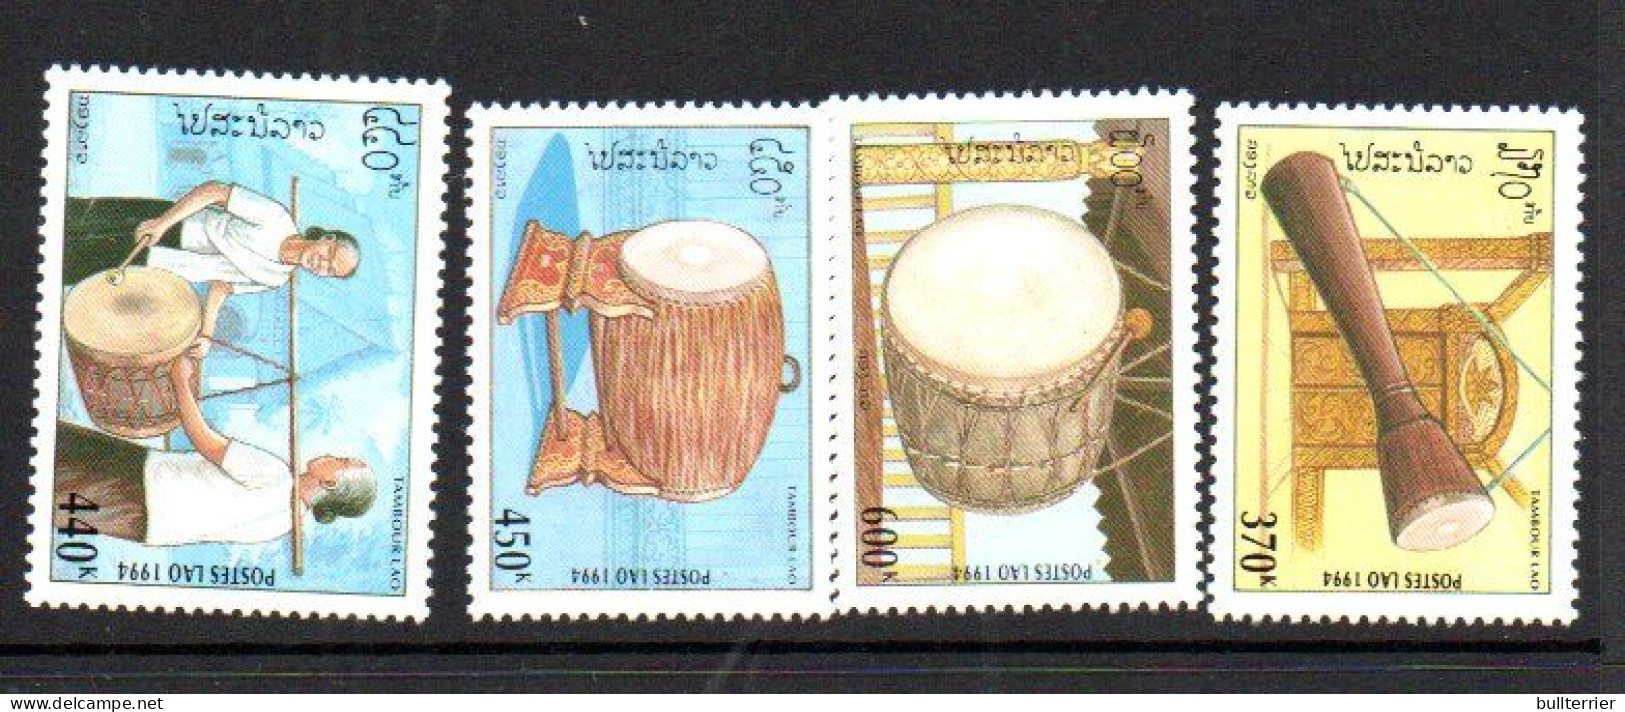 LAOS -  1994 - MUSICAL INSTRUMENTS  SET OF 4 MINT NEVER HINGED - Laos